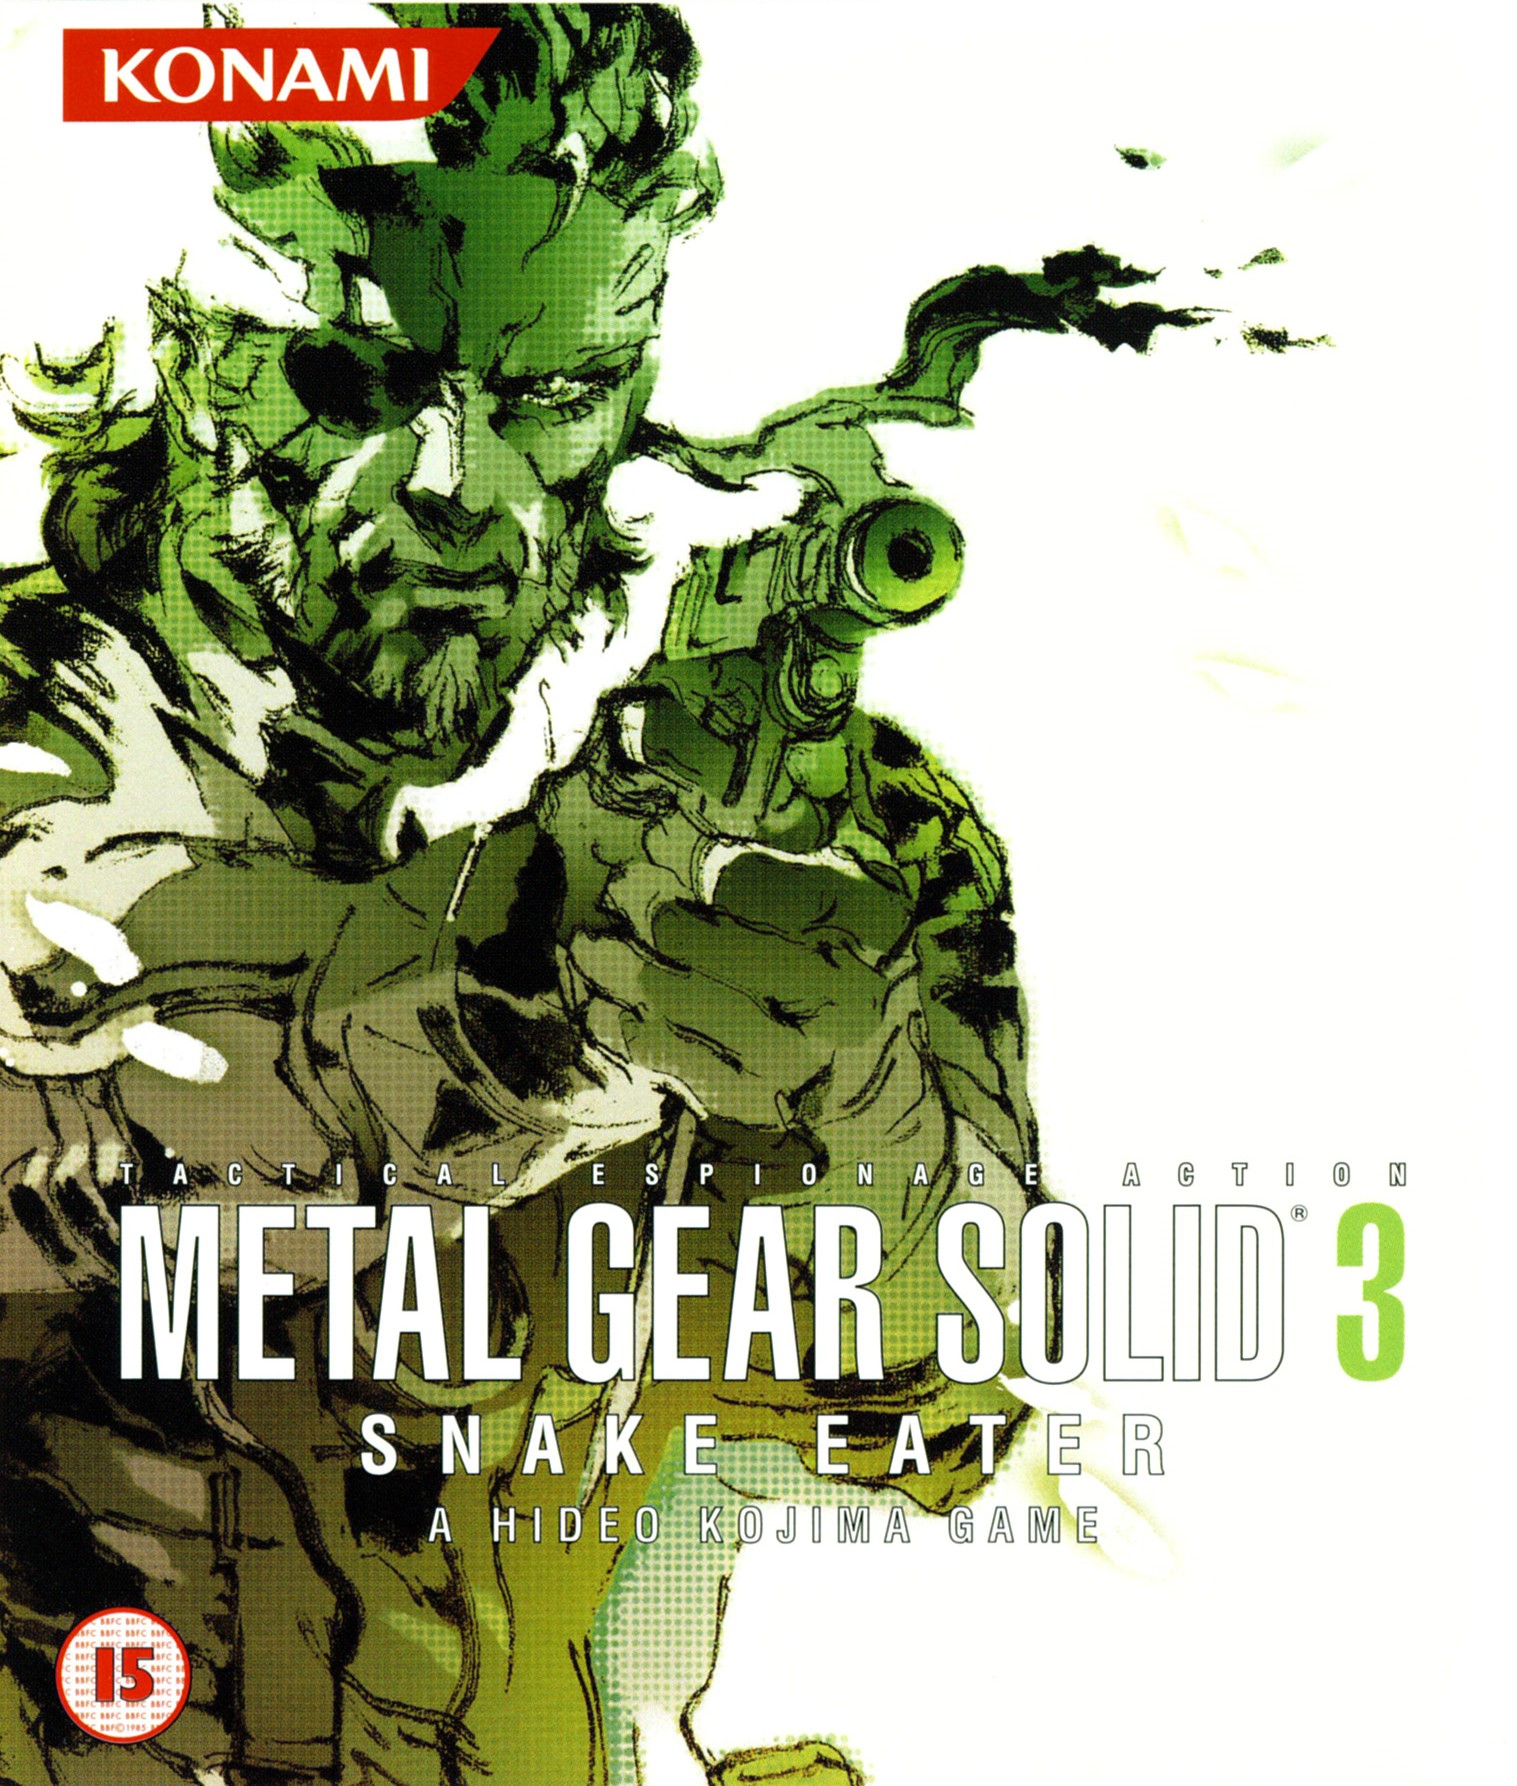 Spielecover: Metal Gear Solid 3 - Snake Eater